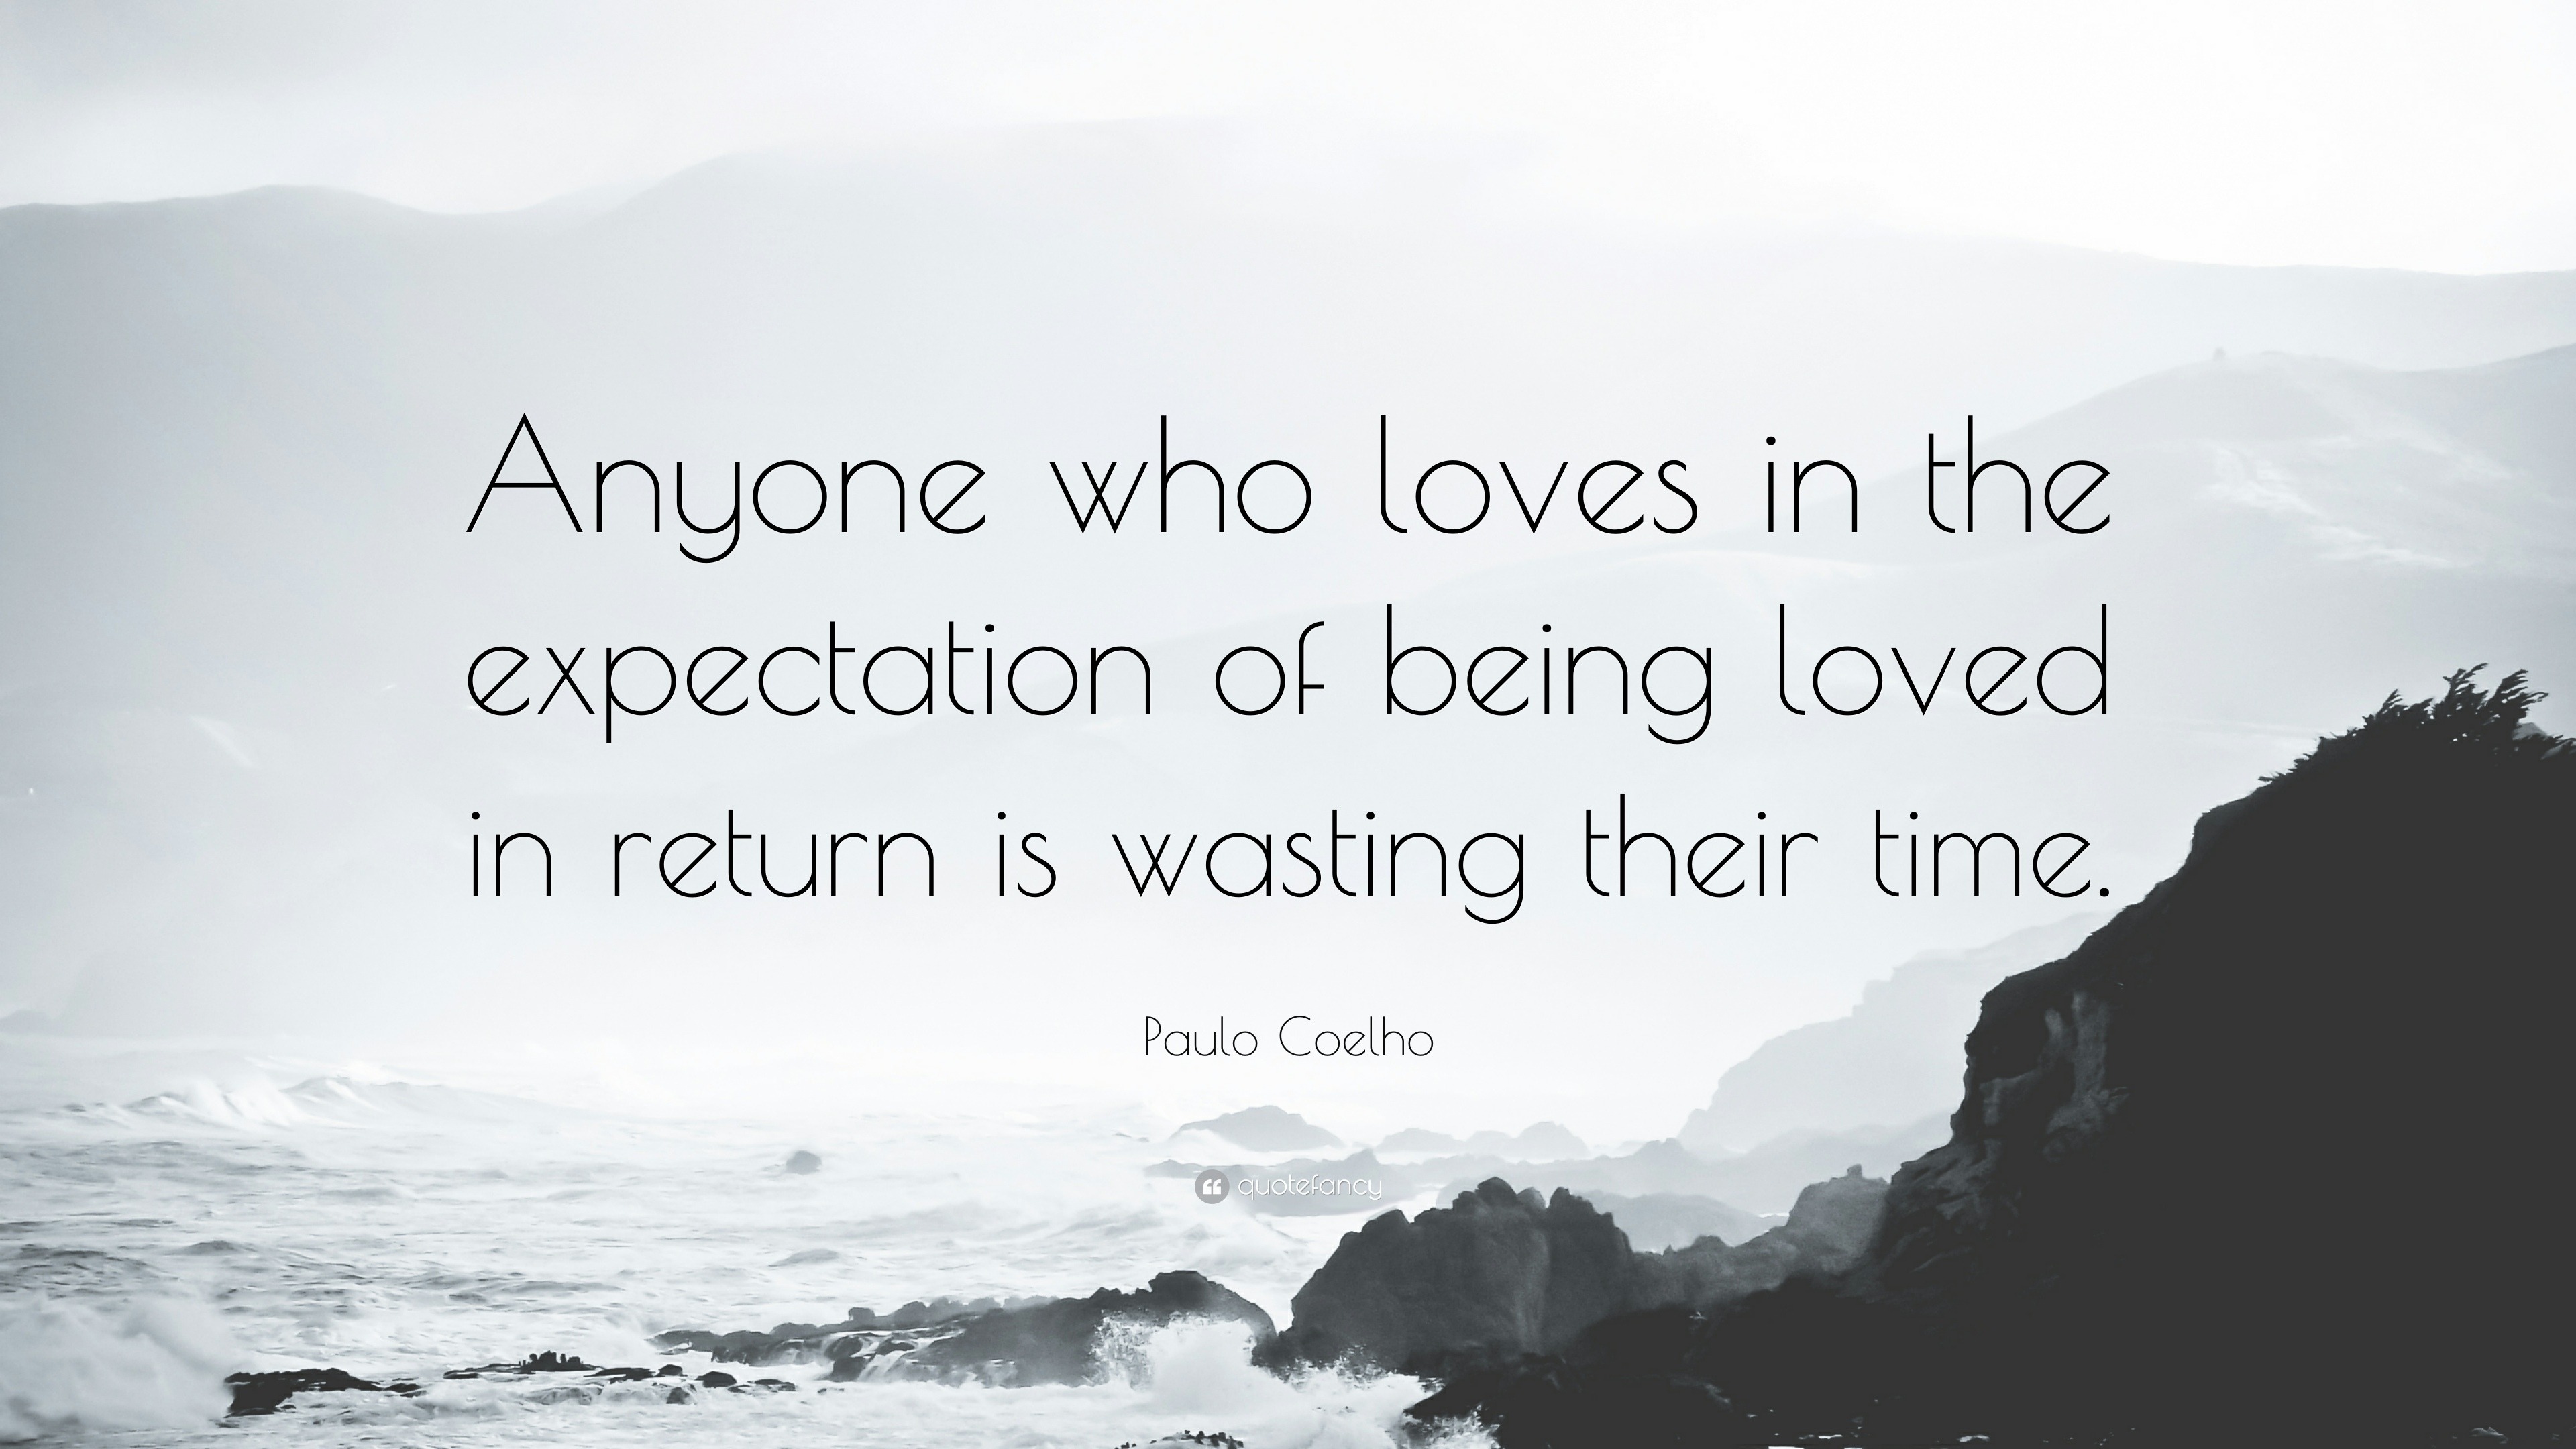 Paulo Coelho Quote: “Anyone who loves in the expectation of being loved ...